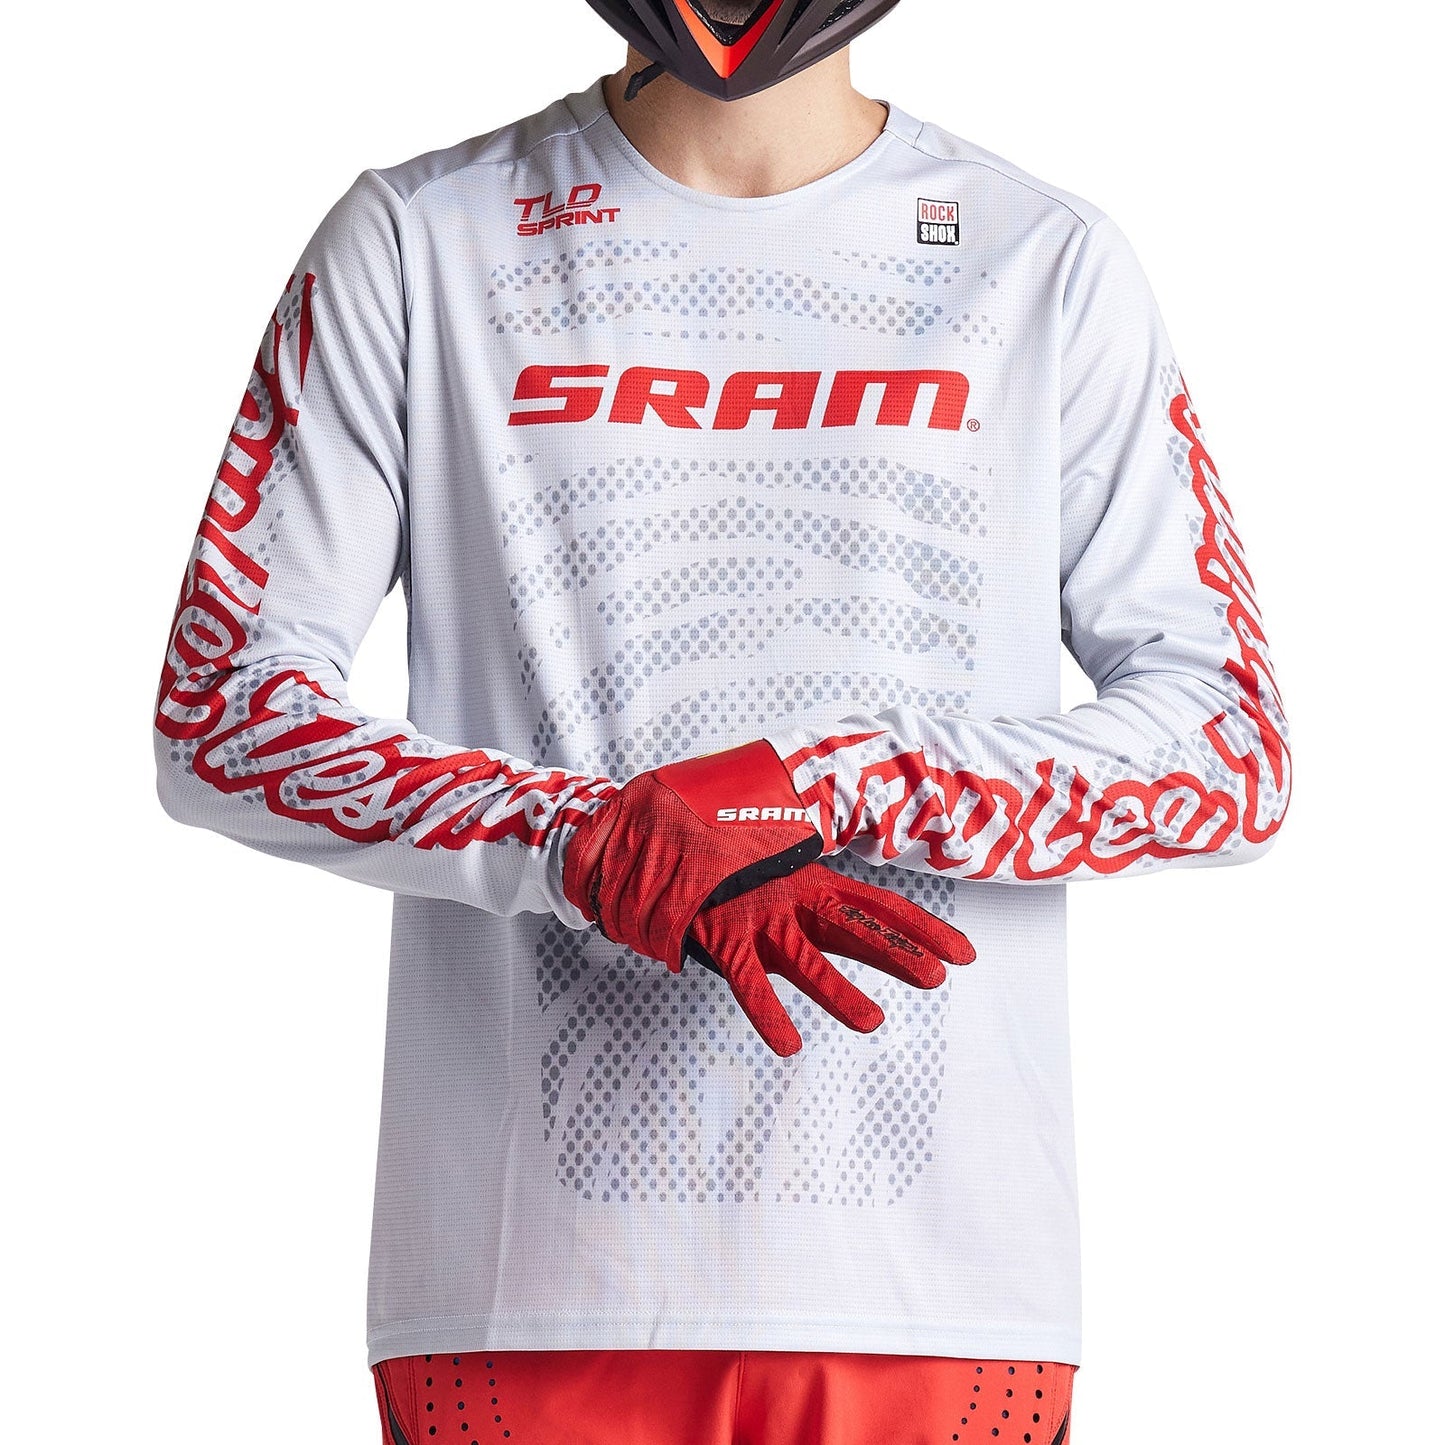 Troy Lee Sprint Jersey SRAM Shifted Cement